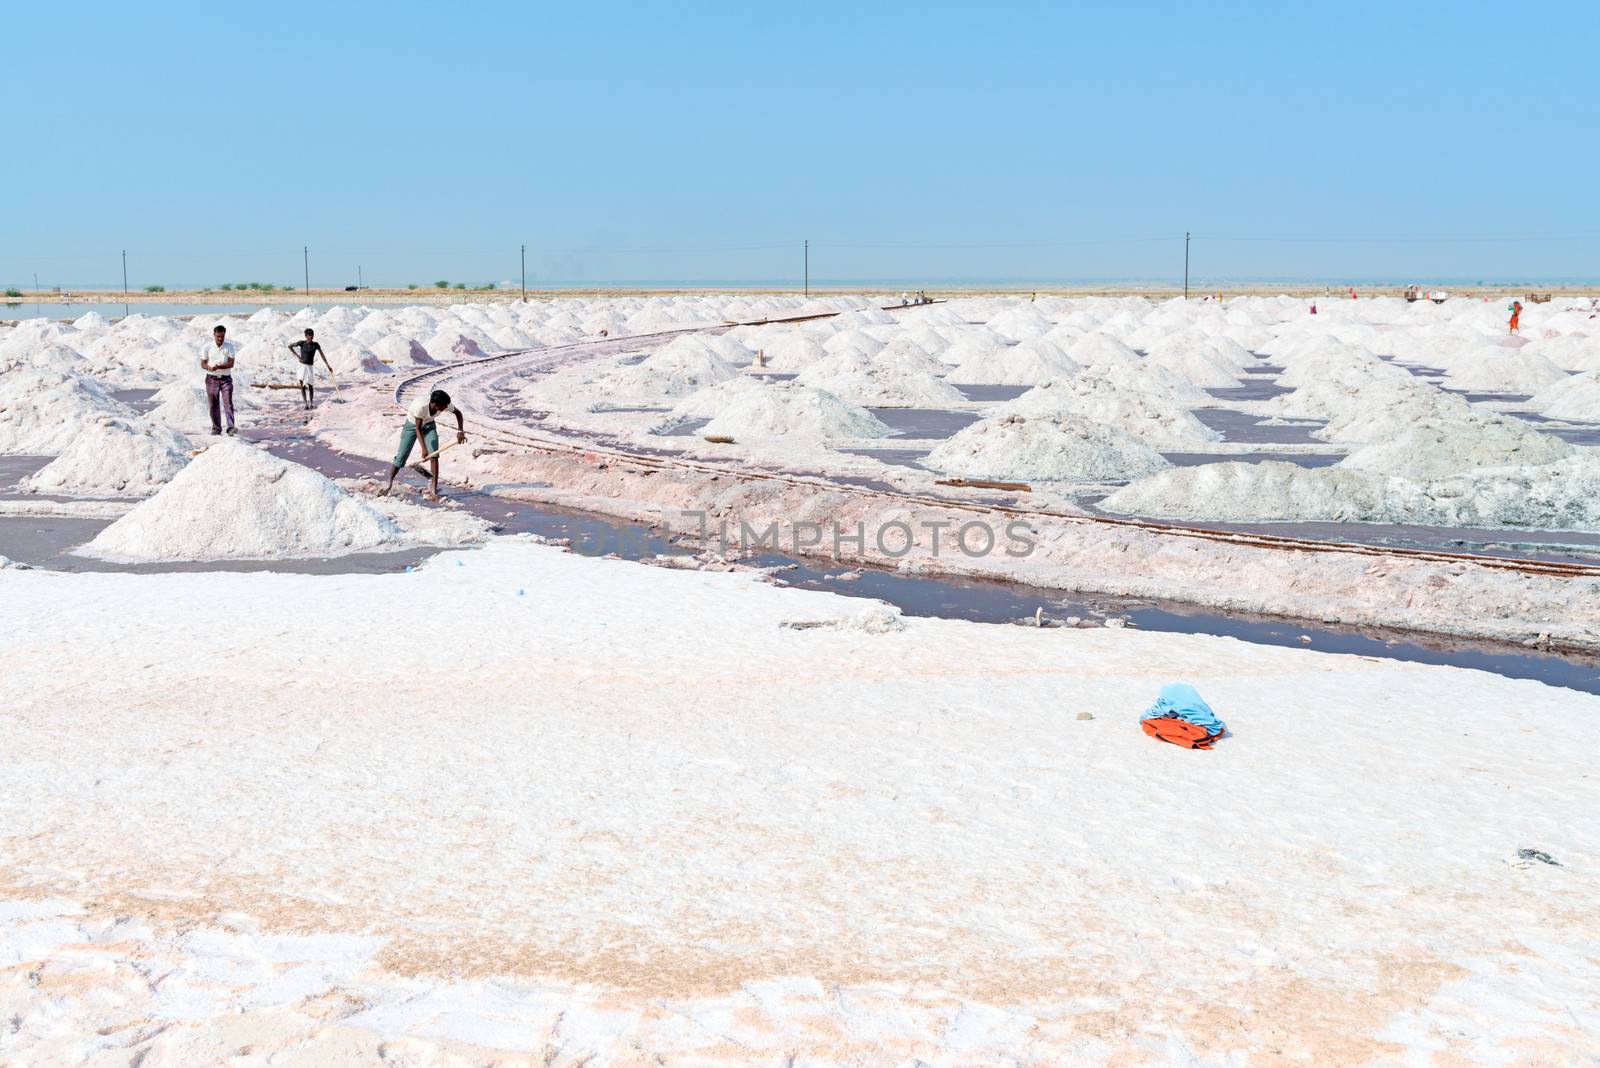 SAMMBHAR SALT LAKE, INDIA - NOV 19: Workers collect salt in salt farm on Nov 19, 2012 in Sambhar Salt Lake, India. It is India's largest saline lake where salt has been farmed for a thousand years. 